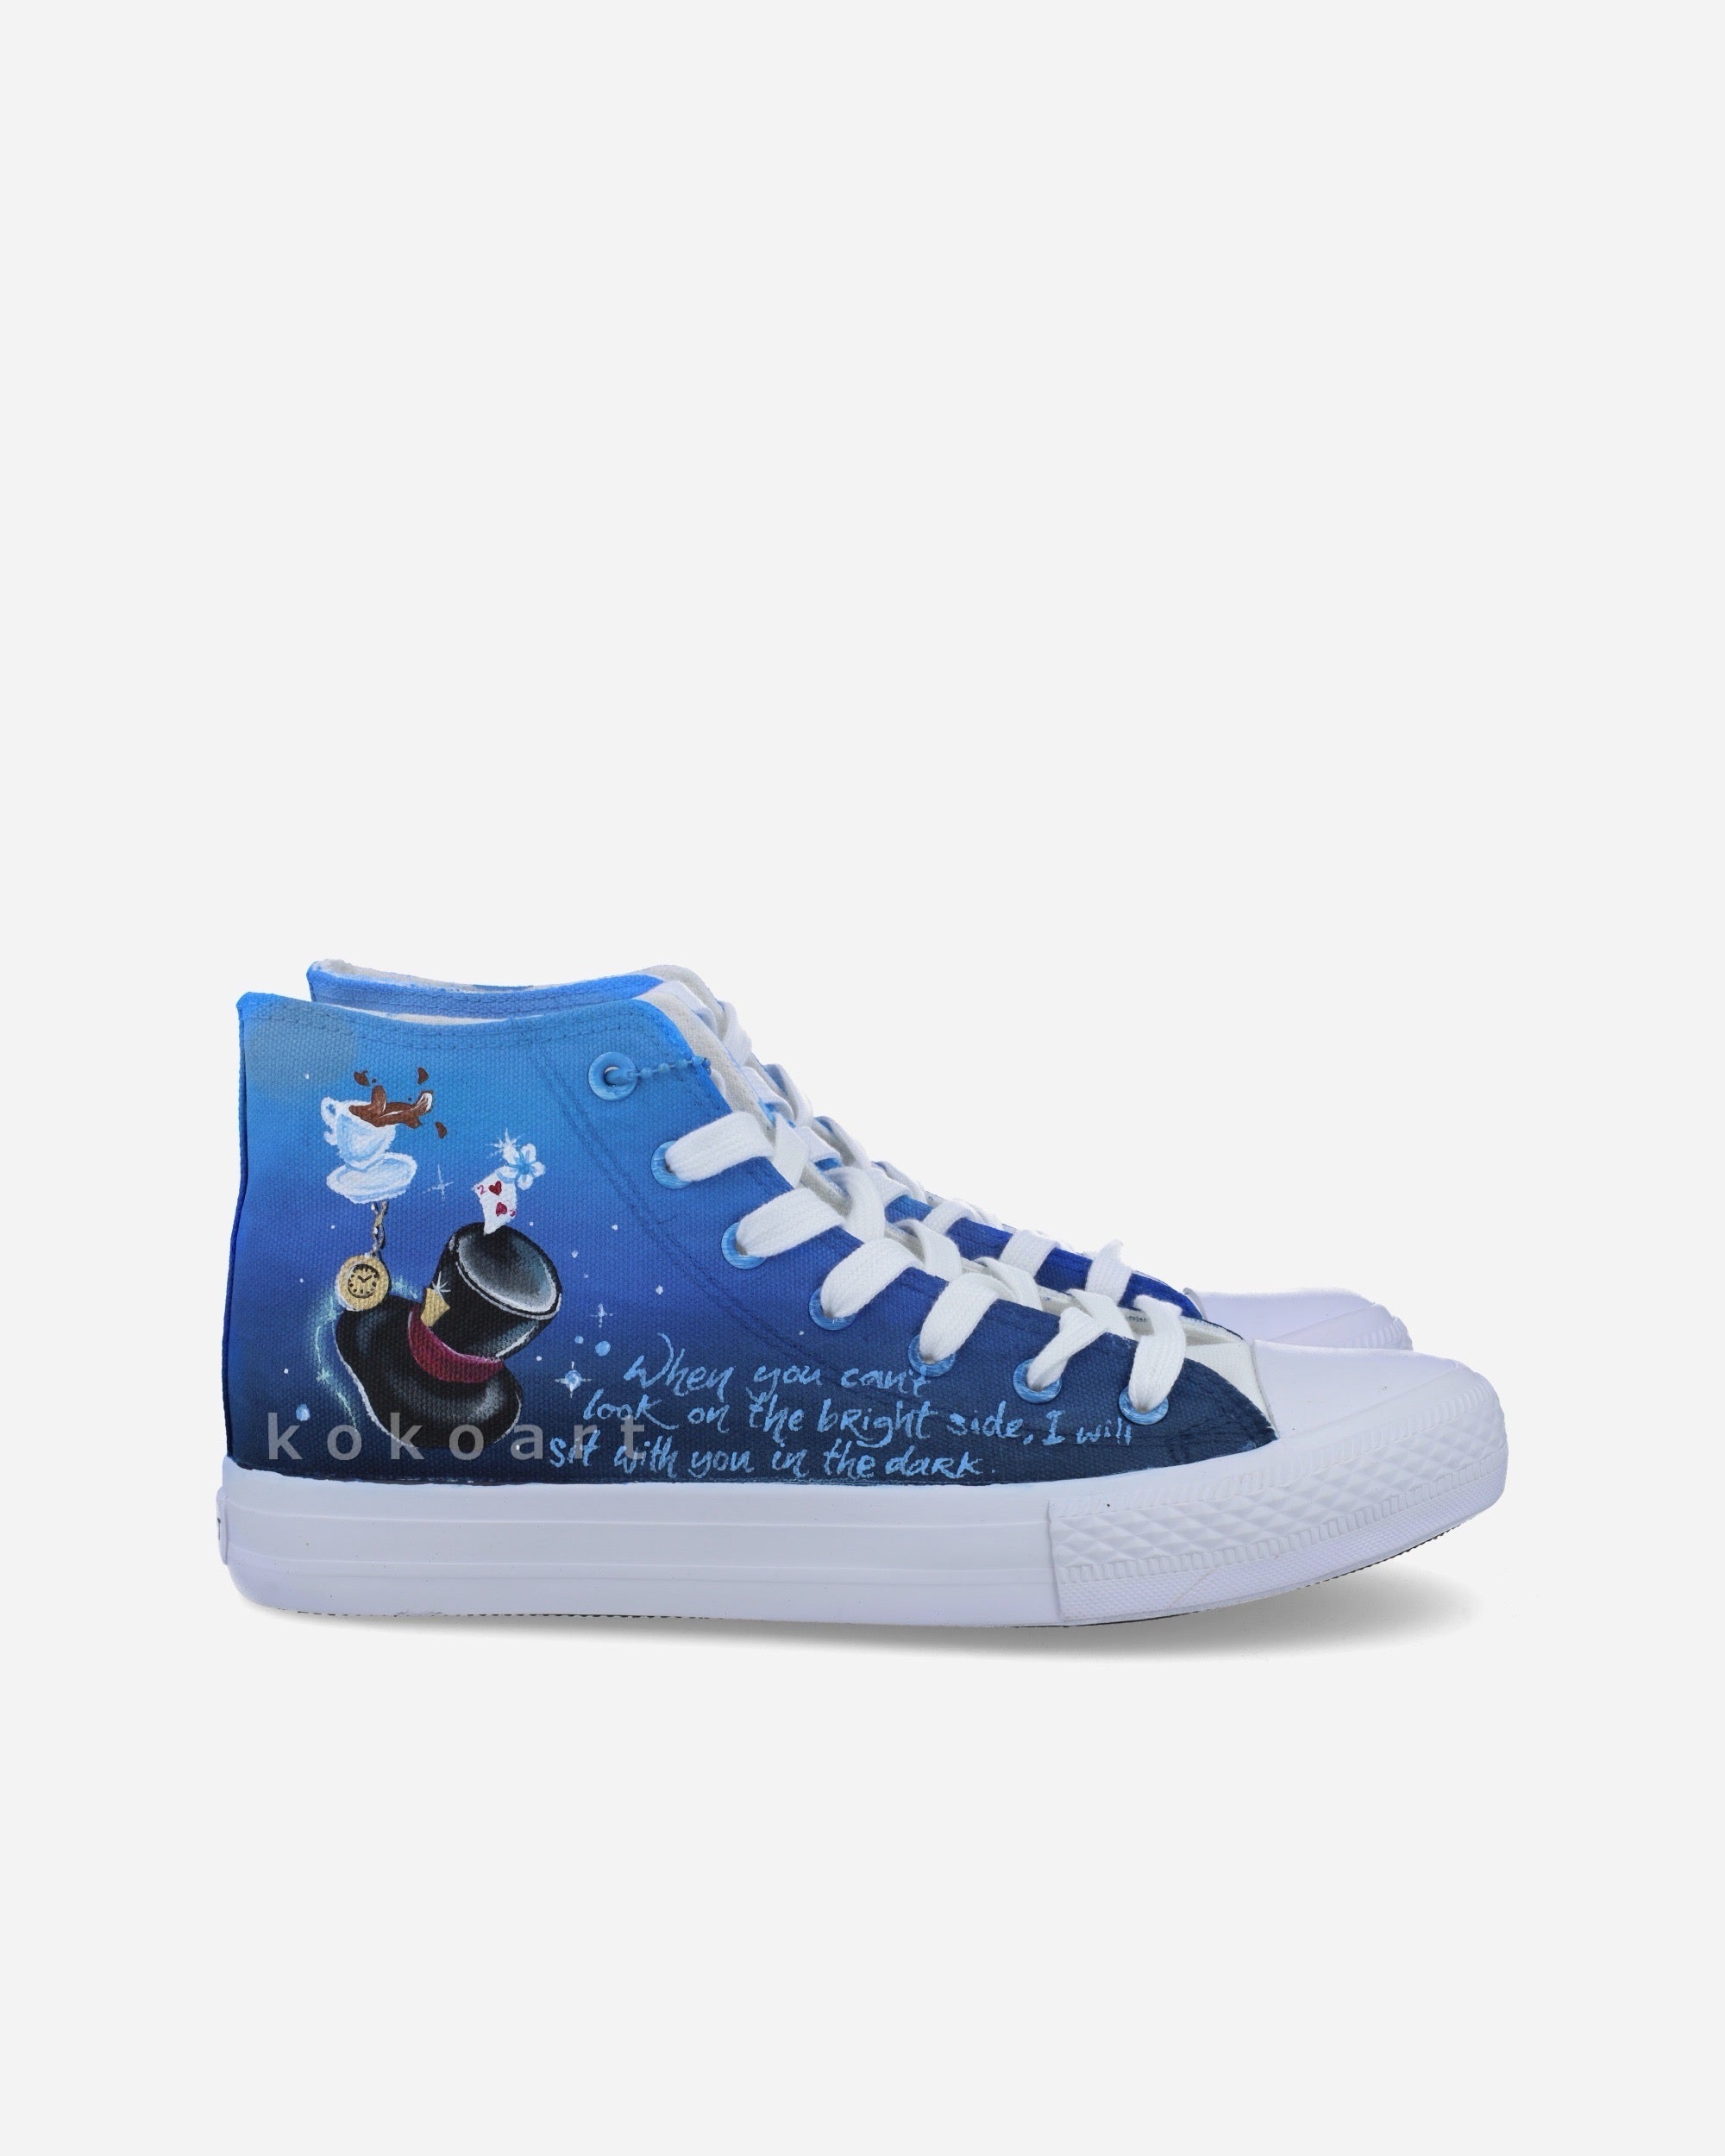 Movies Hand Painted Shoes